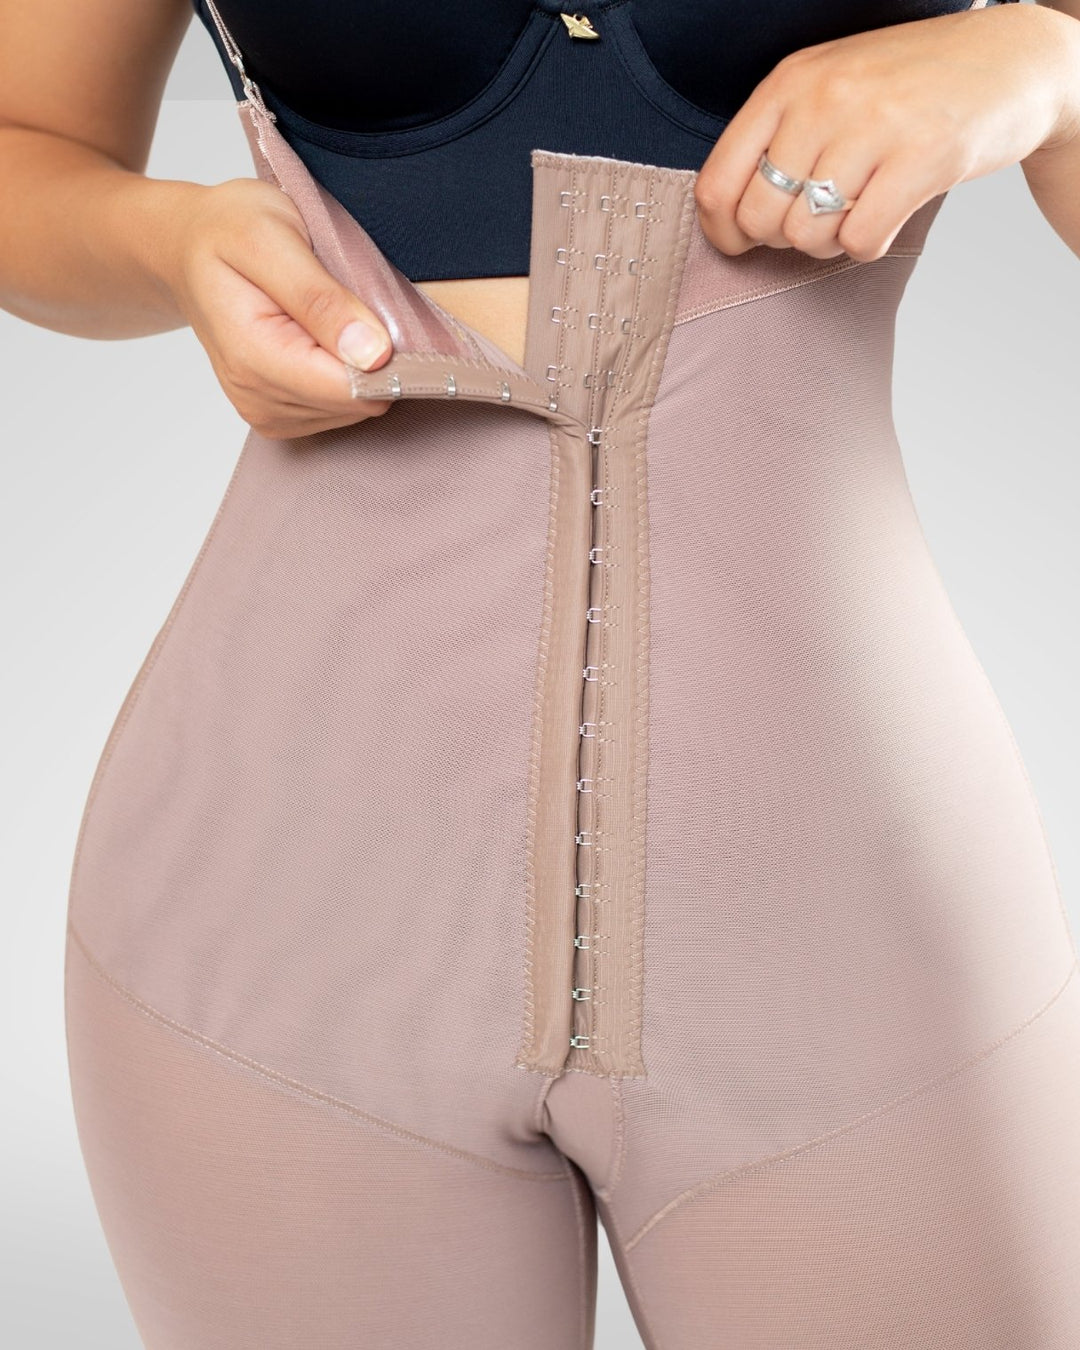 shapewear Invisible under clothes